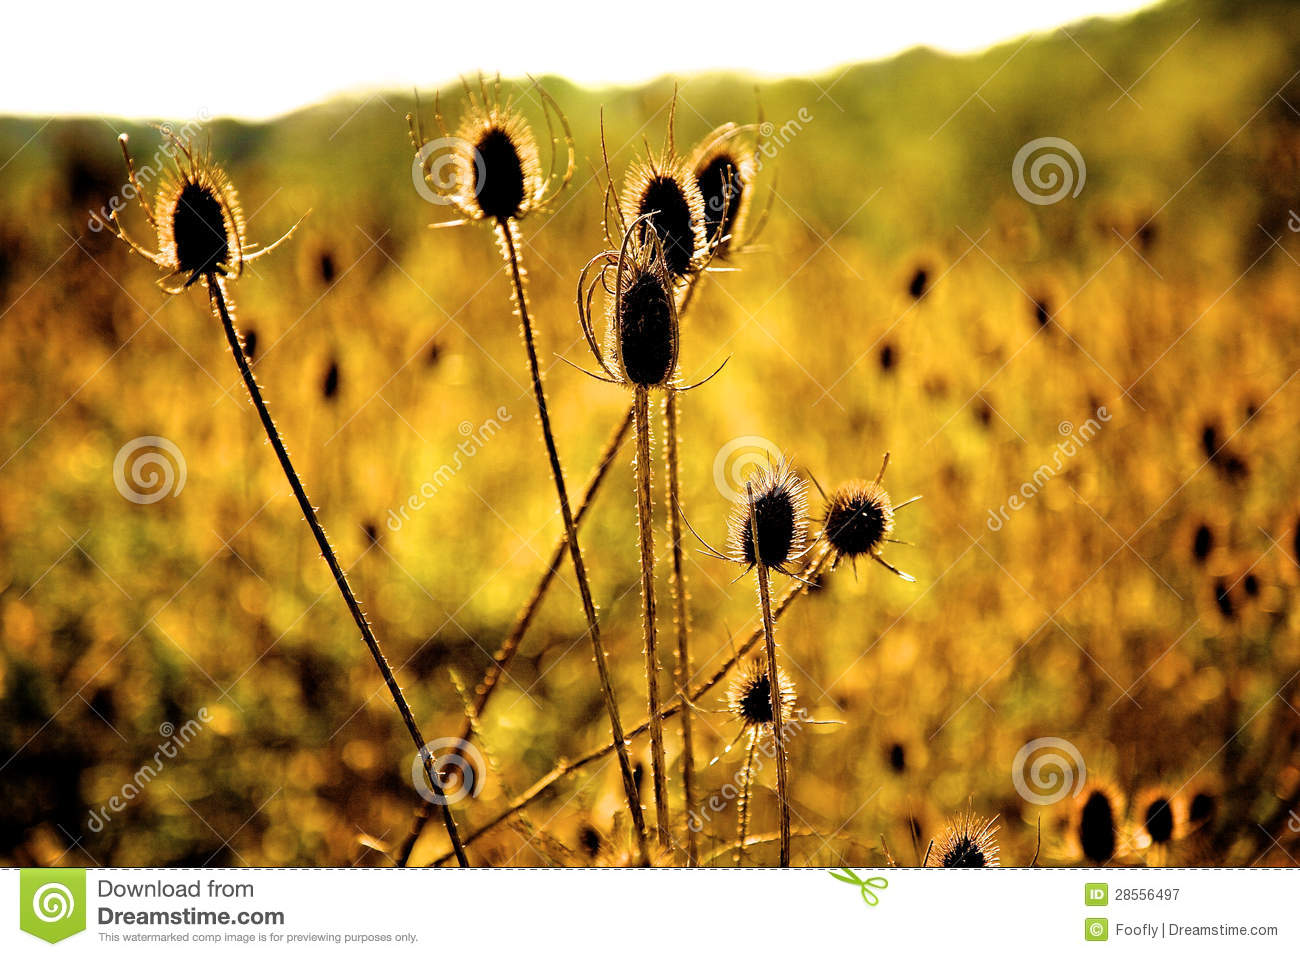 Sun Shining Through Thorny Weeds Royalty Free Stock Photography